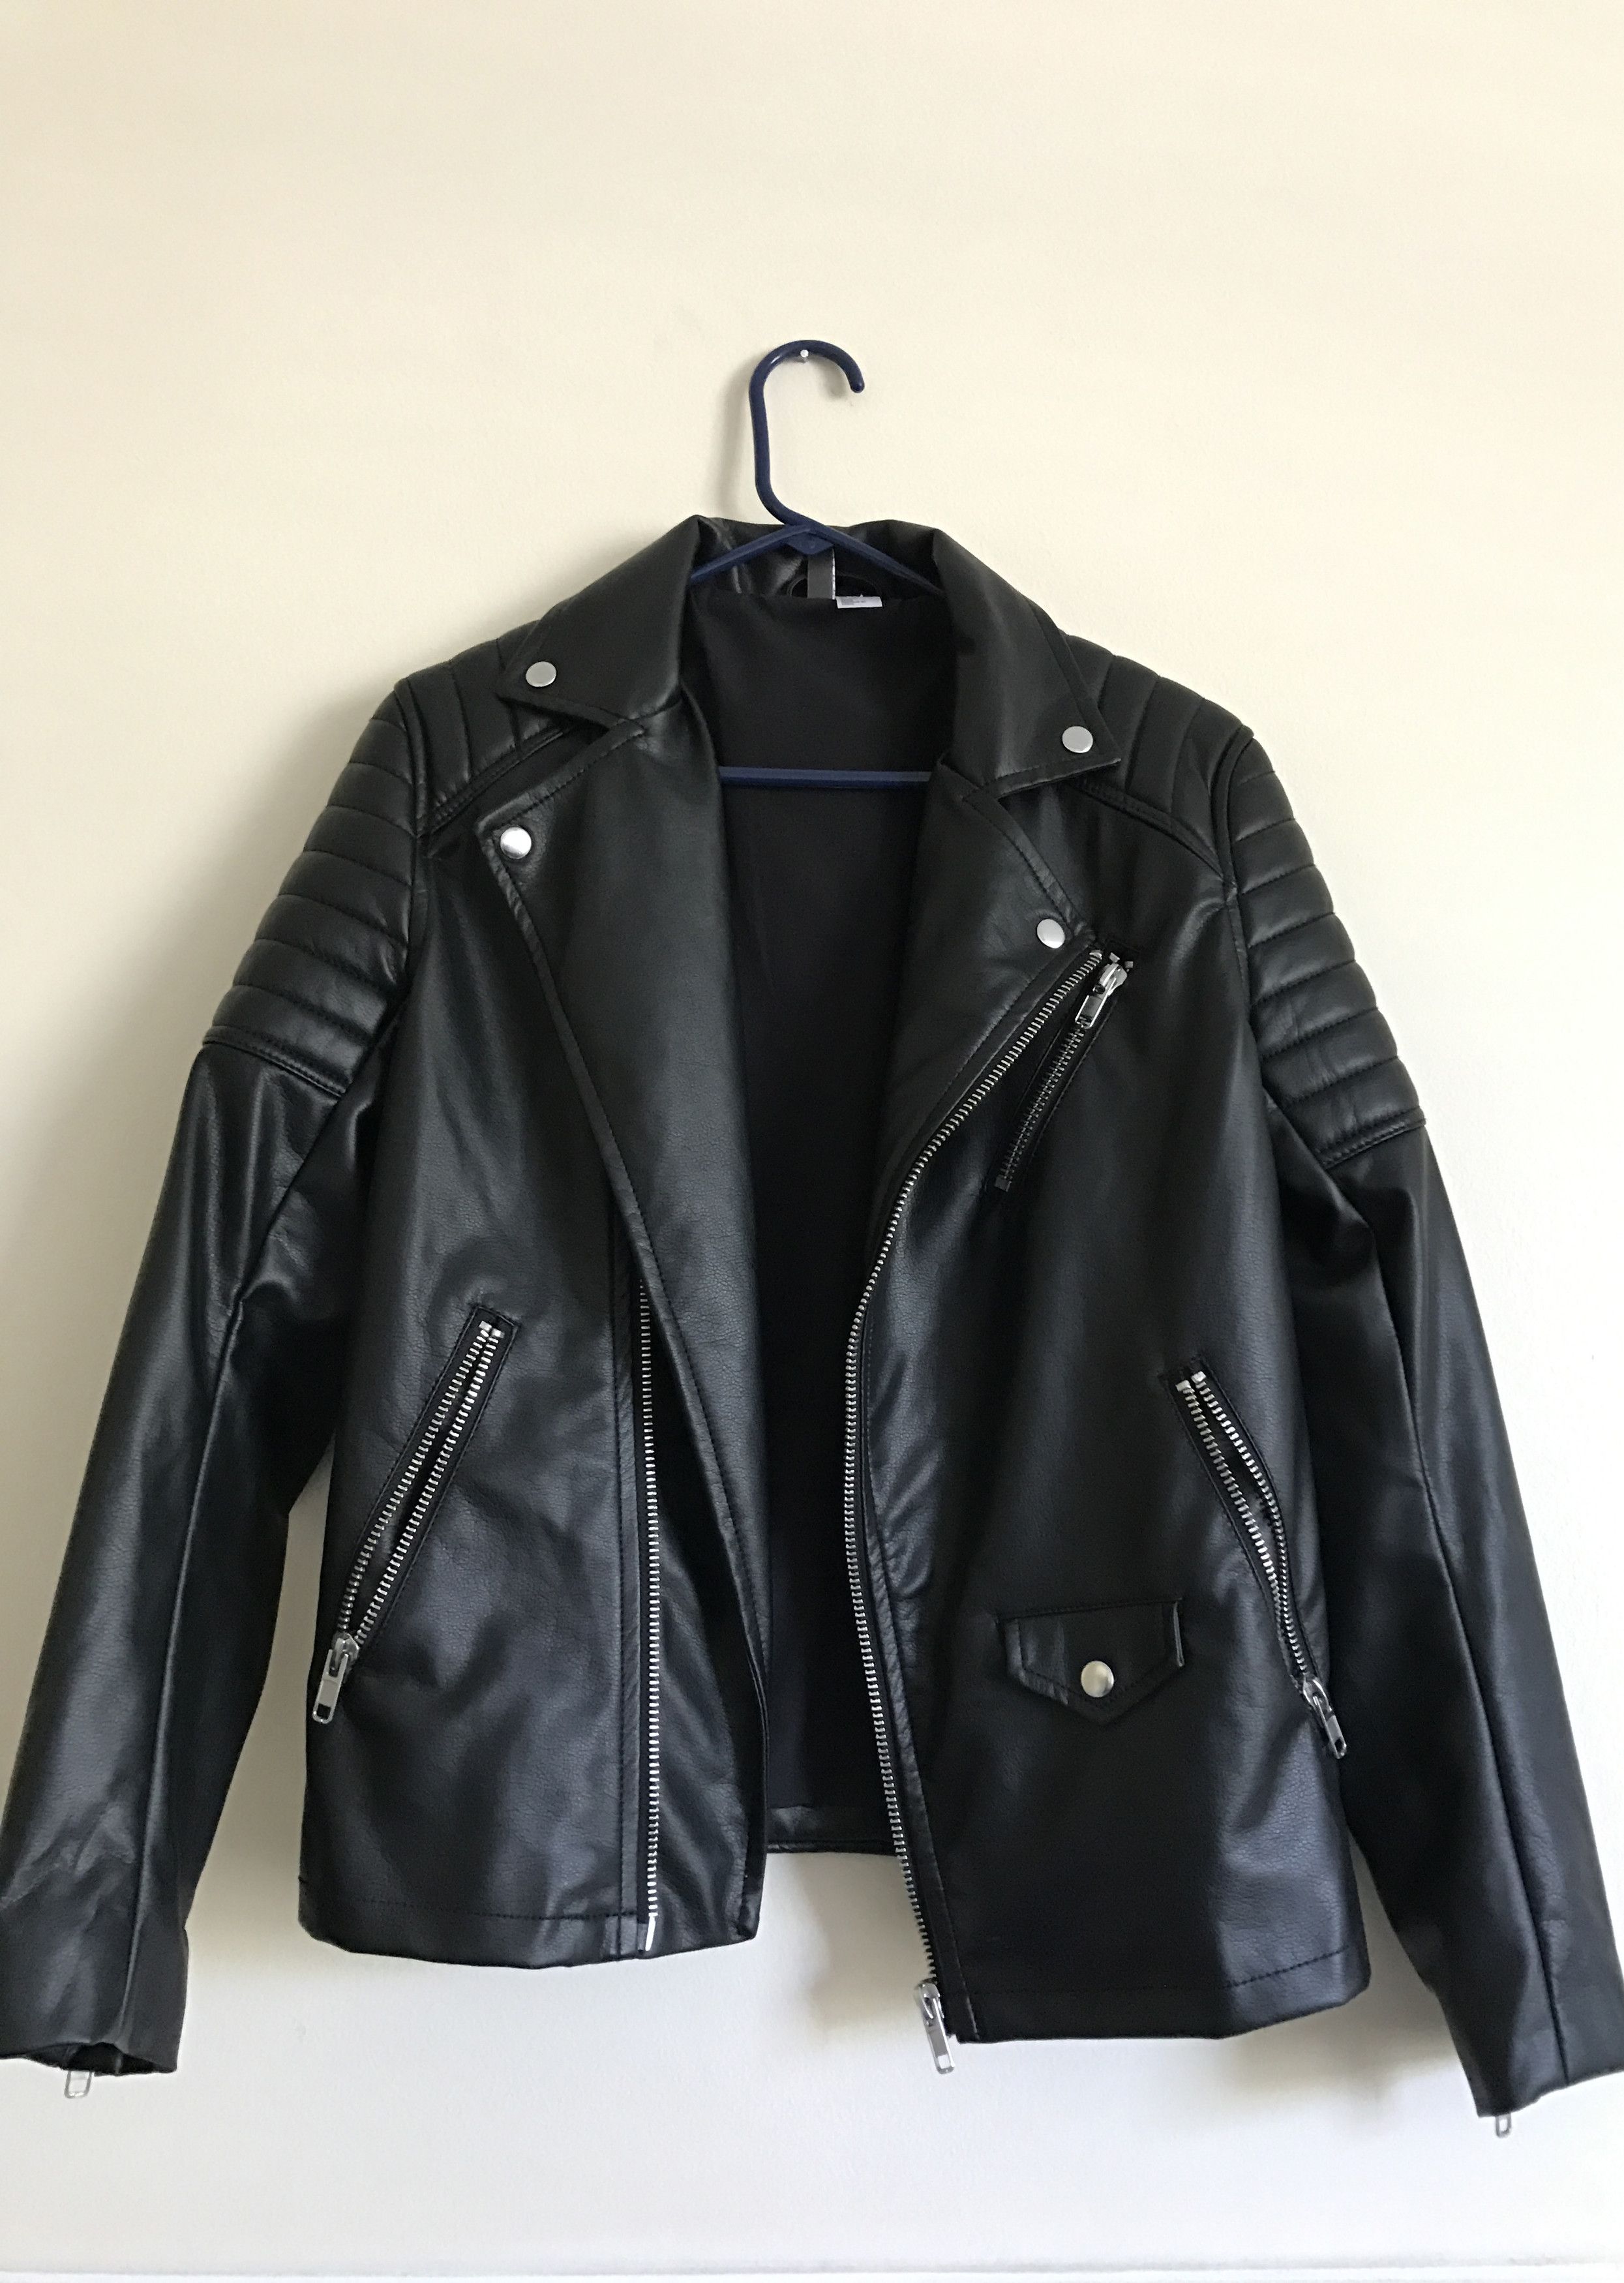 H&M Leather Jacket Size US S / EU 44-46 / 1 - 1 Preview